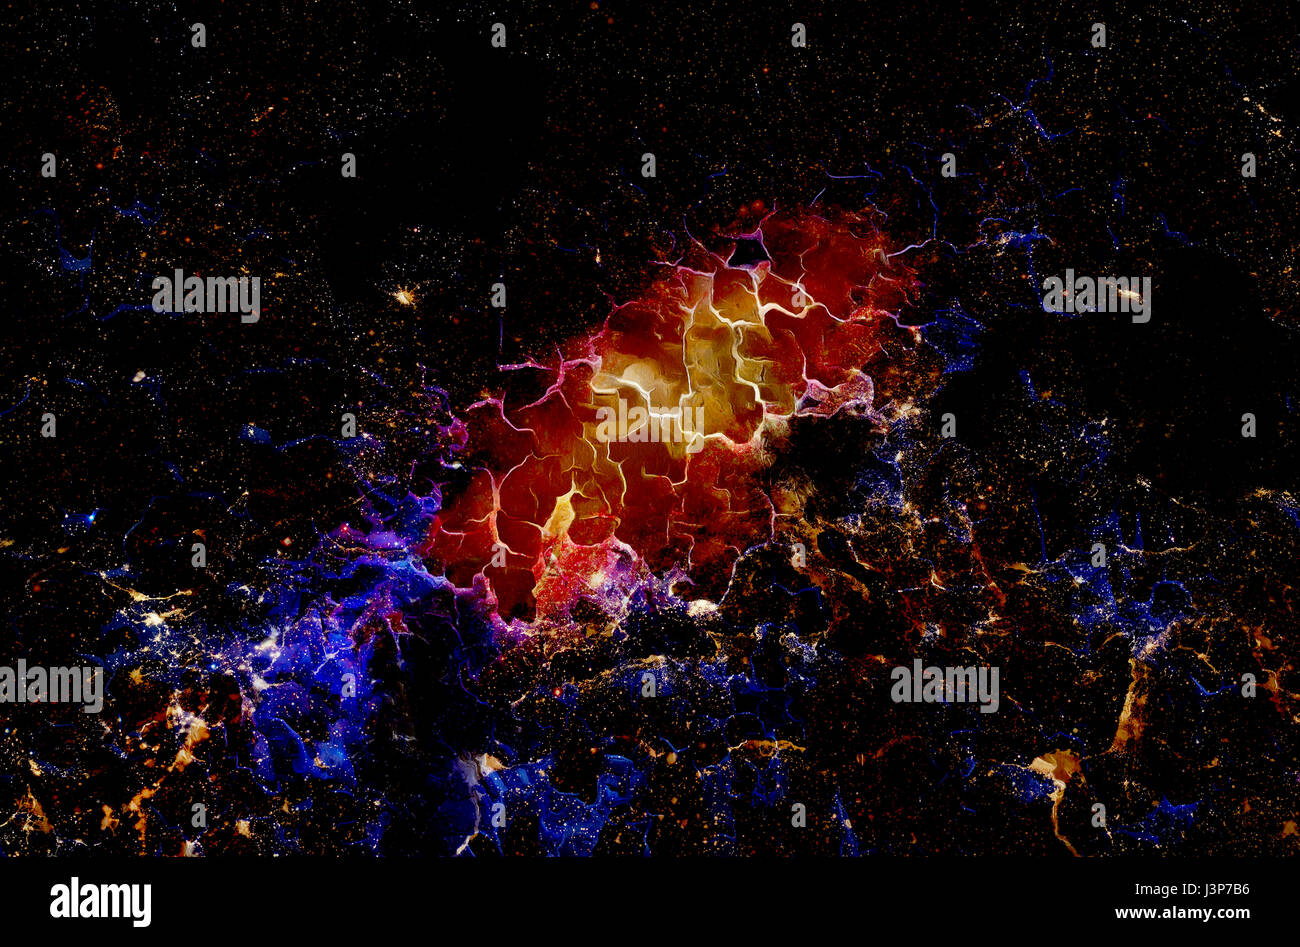 Cosmic space and stars, color cosmic abstract background. Crackle effect Stock Photo